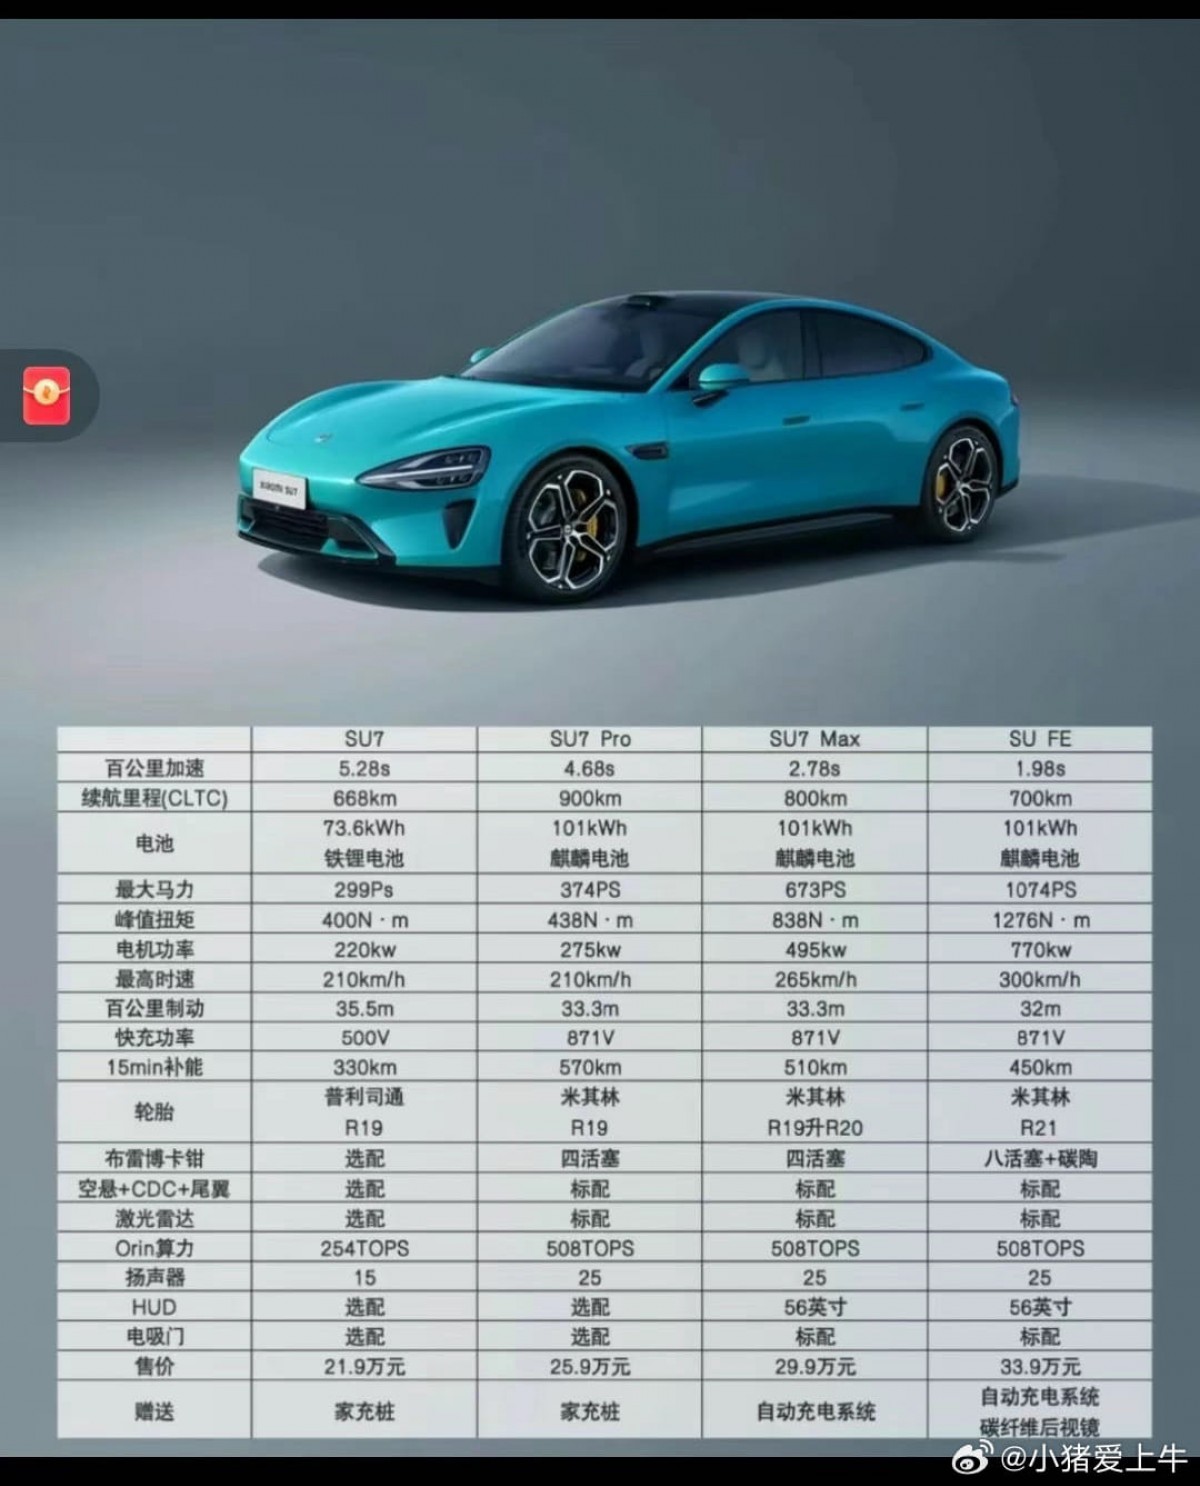 Full specs of Xiaomi SU7 together with prices - 4 models and Tesla Plaid challenger in tow